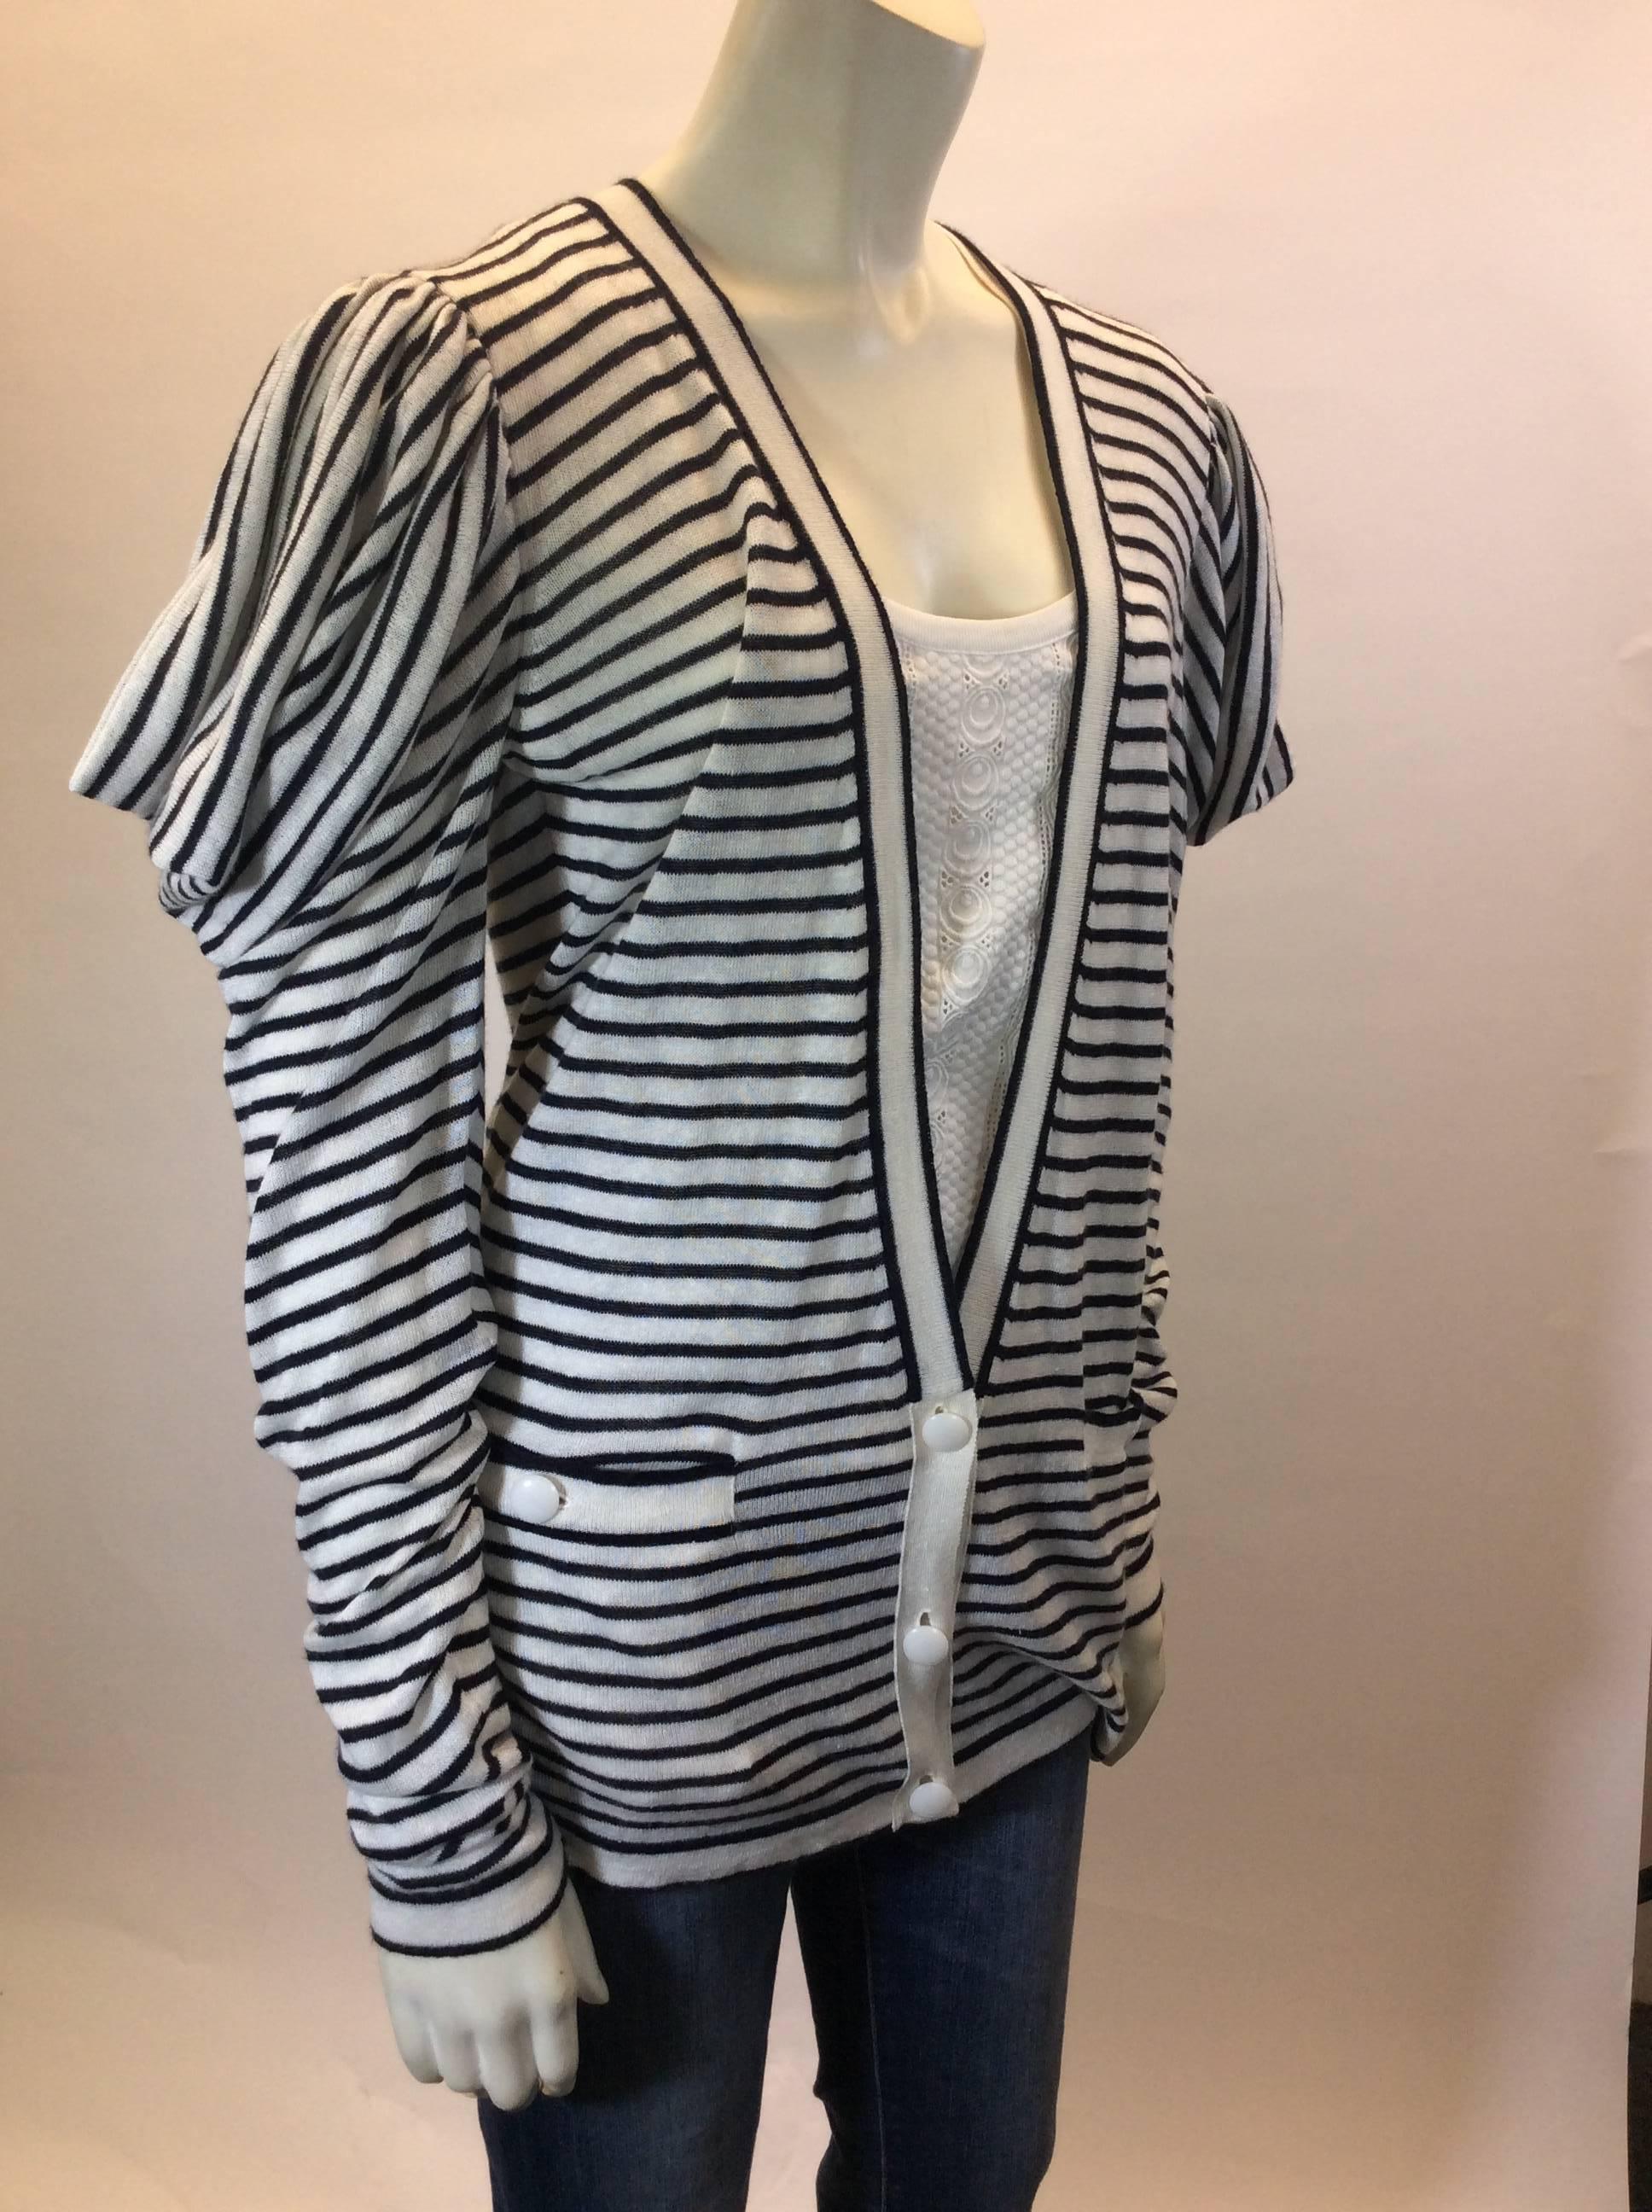 Brand New Stella McCartney Sweater
Blue and White Cashmere
Detail on Shoulders 
Buttons on front for Closure
Single Pocket on either side
29" Inch Sleeve Length